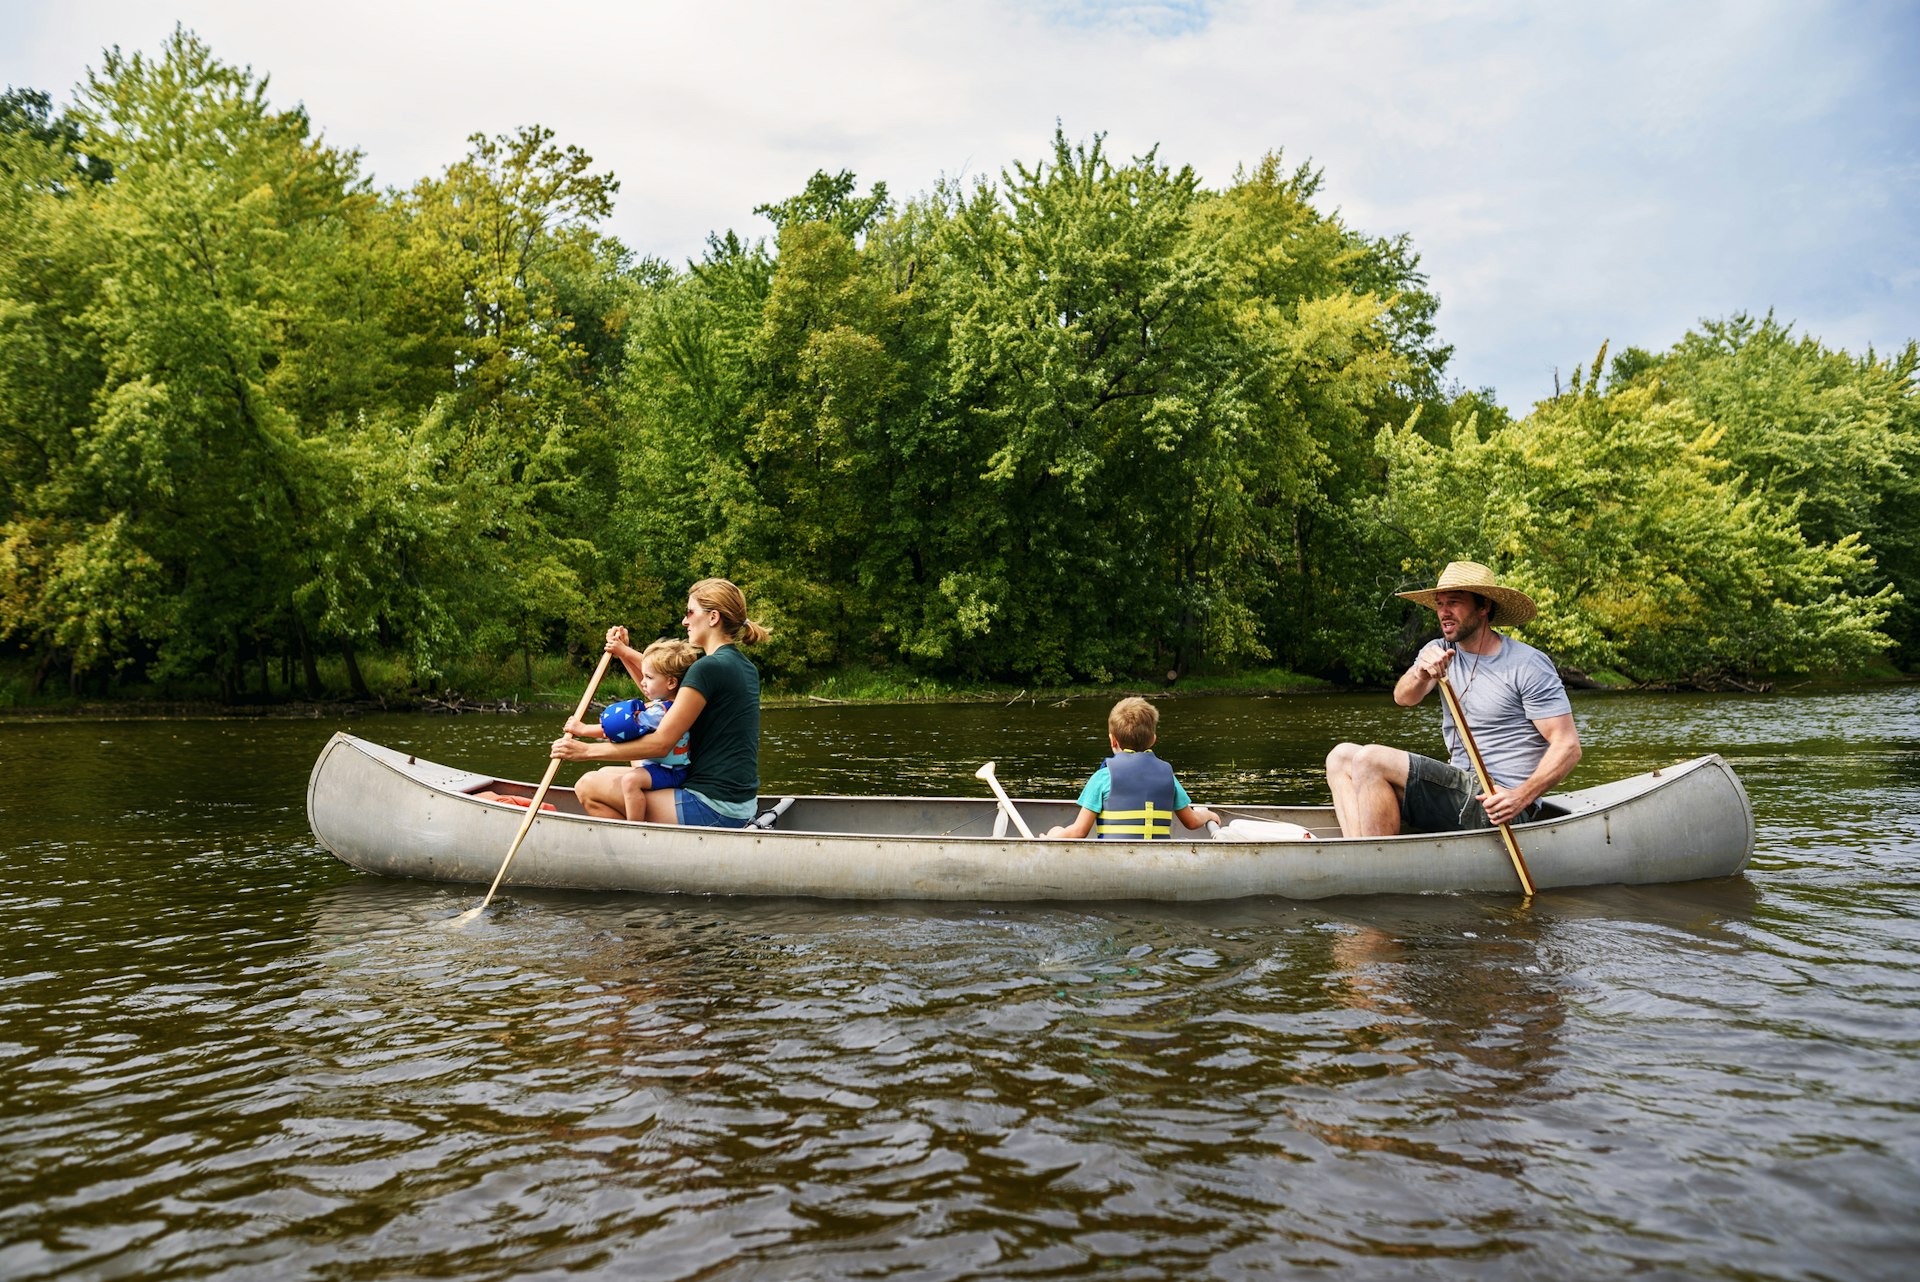 A family canoeing on a river in the USA